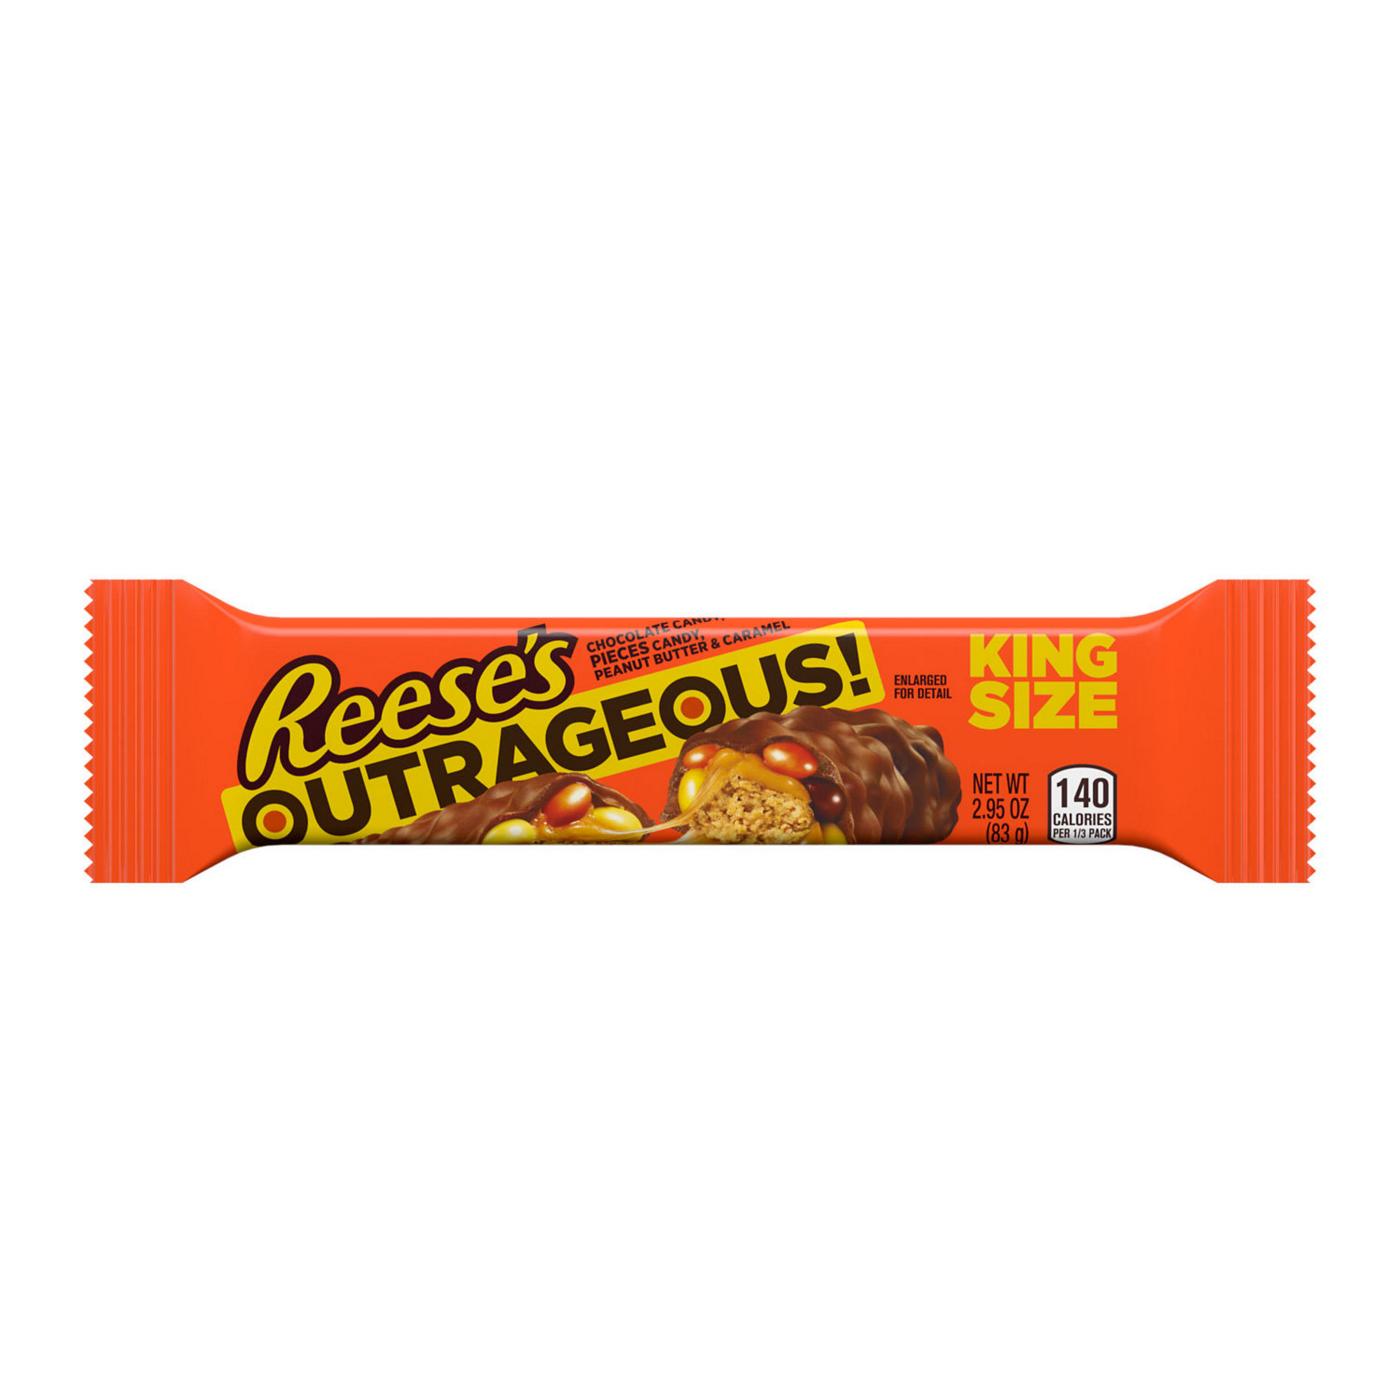 Reese's Outrageous! Milk Chocolate Peanut Butter Candy Bar - King Size; image 1 of 7